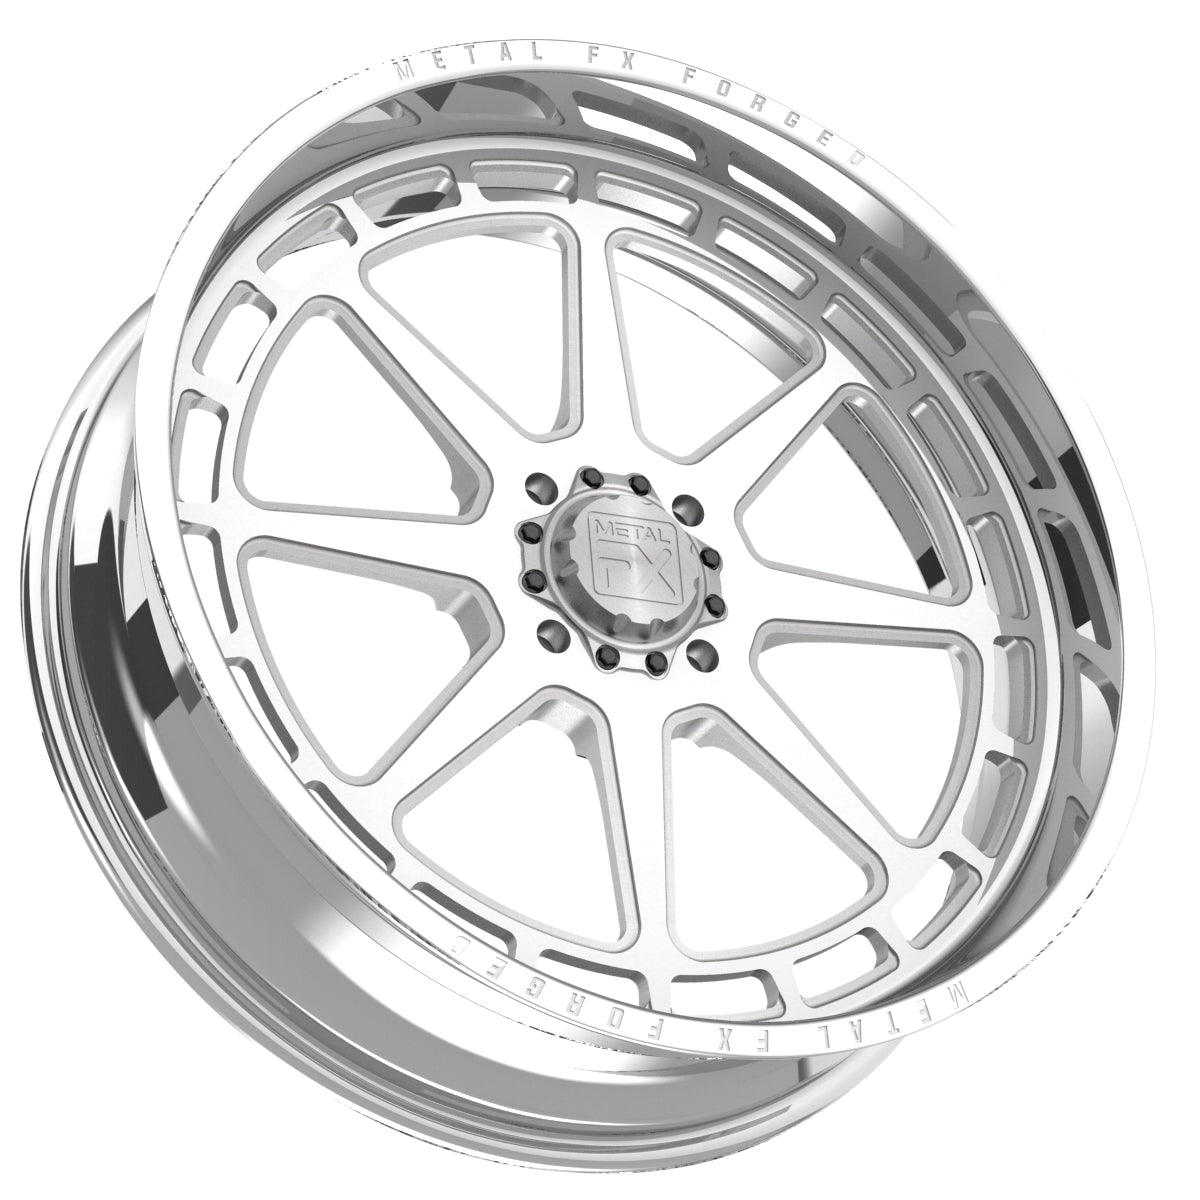 best 24" outlaw, forged monoblock, non-beadlock, raw at metal fx offroad